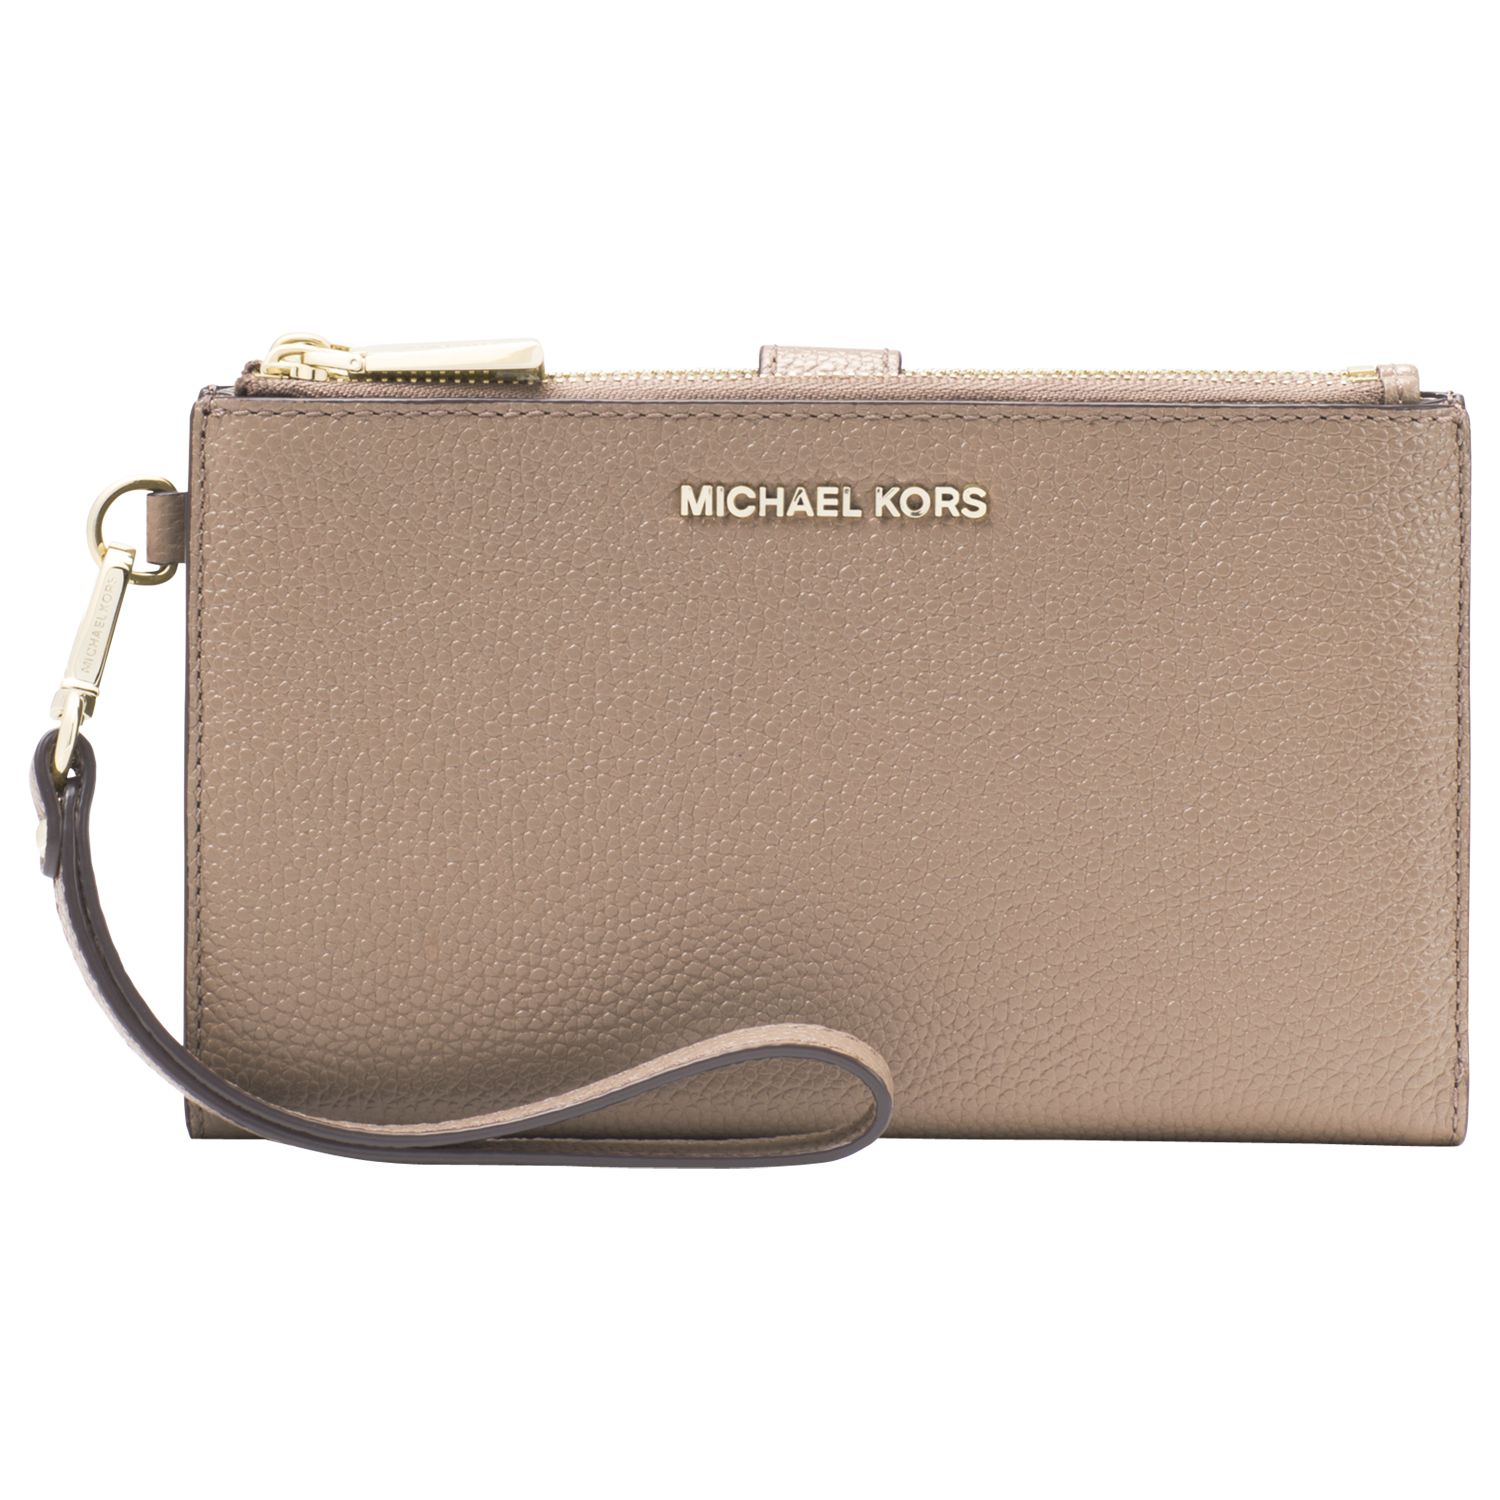 michael kors pouches and clutches